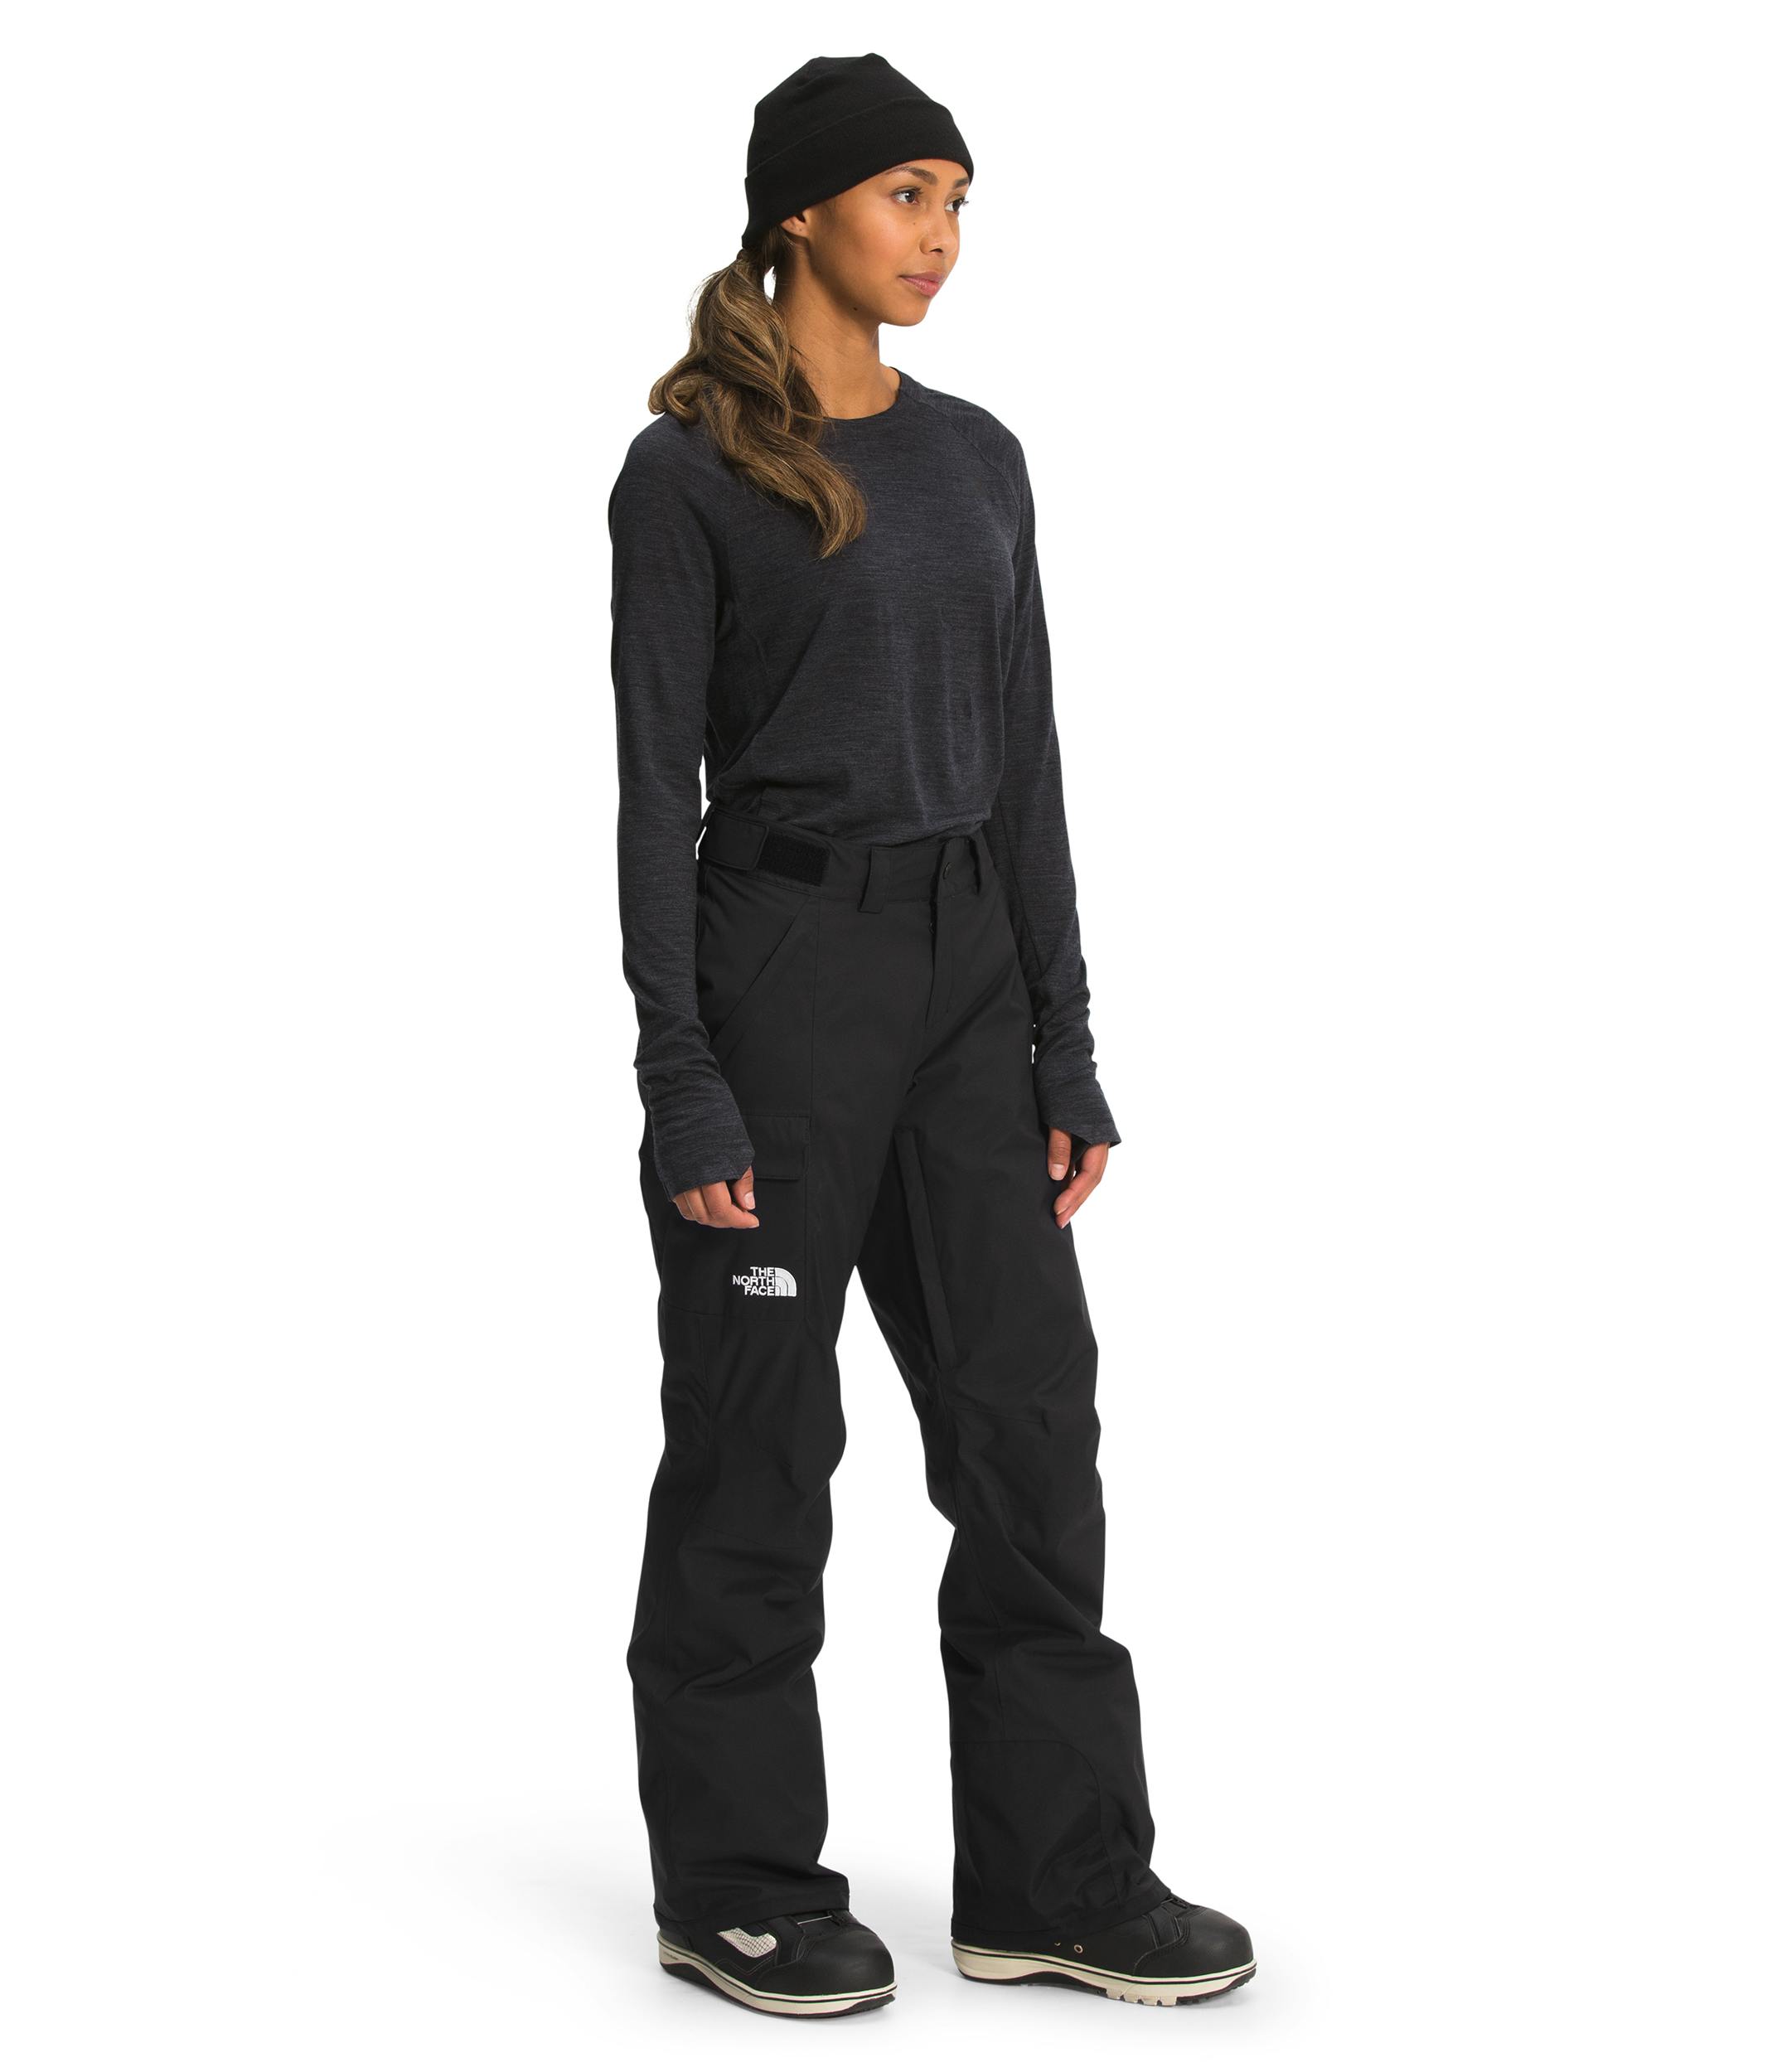 The North Face Women's Freedom Insulated Pants